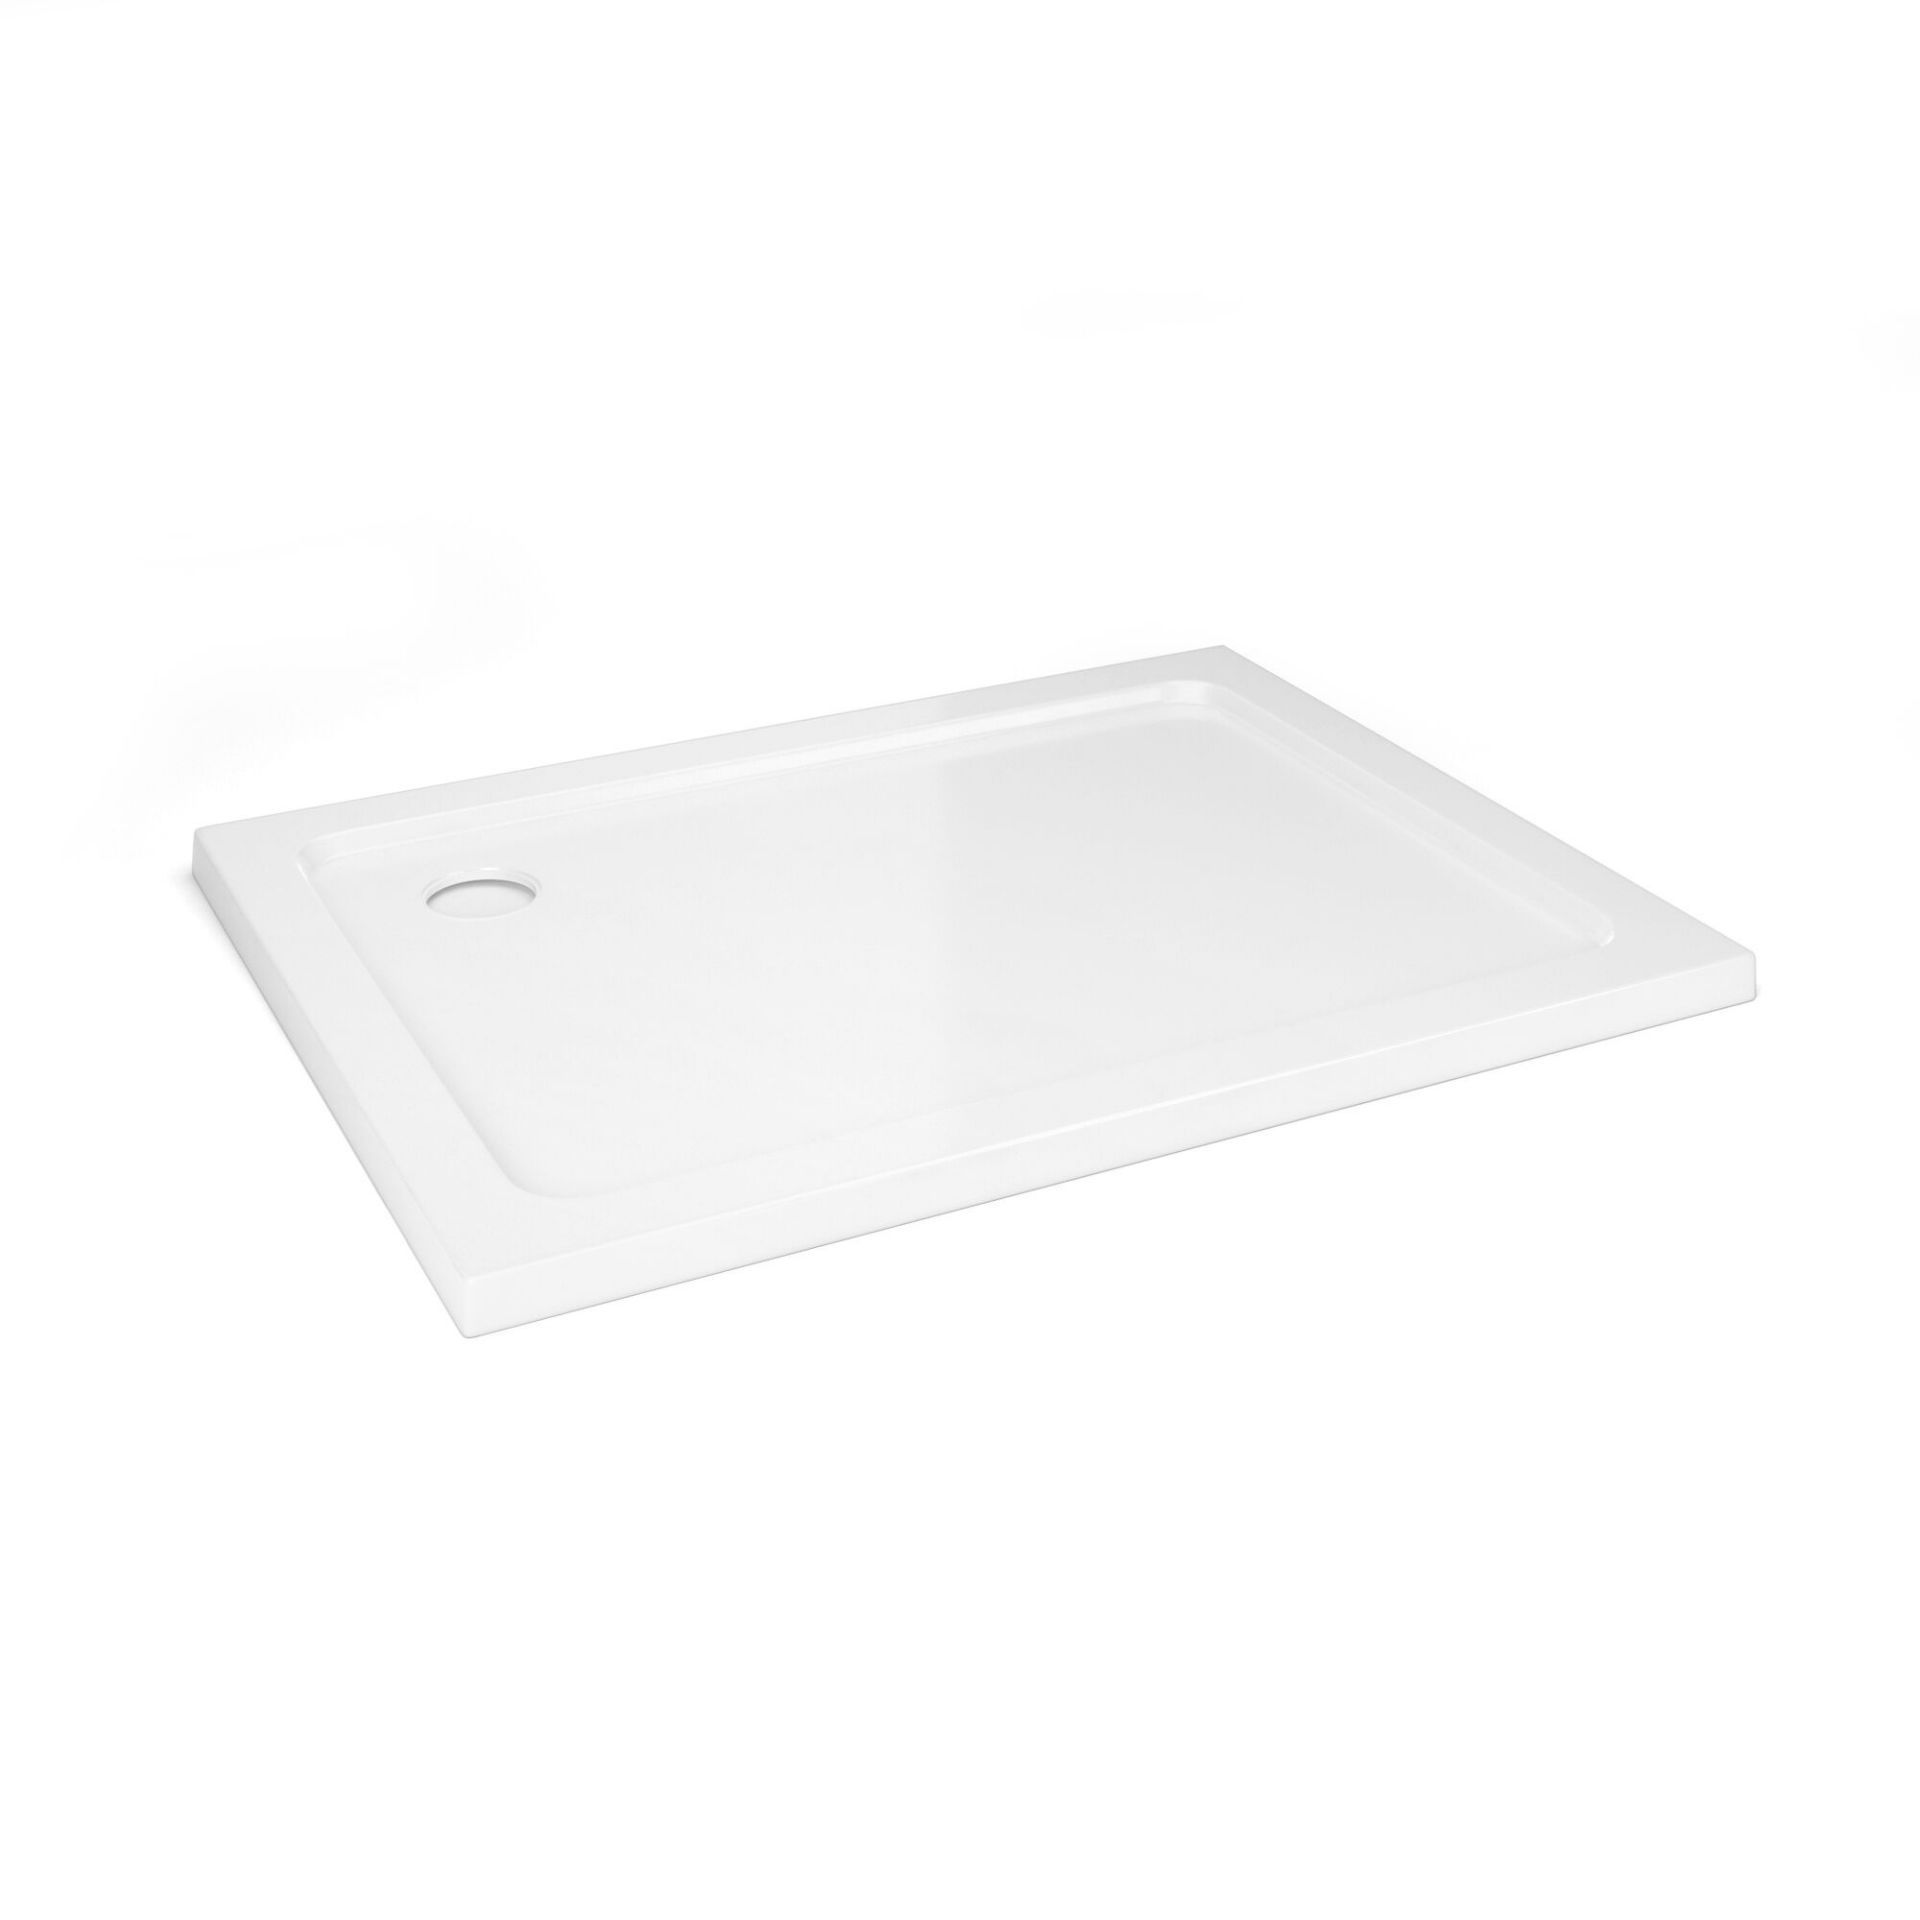 NEW 1000x800mm Rectangular Stone Shower Tray - Ultra Slim.RRP £299.99.Low profile ultra slim d... - Image 2 of 2